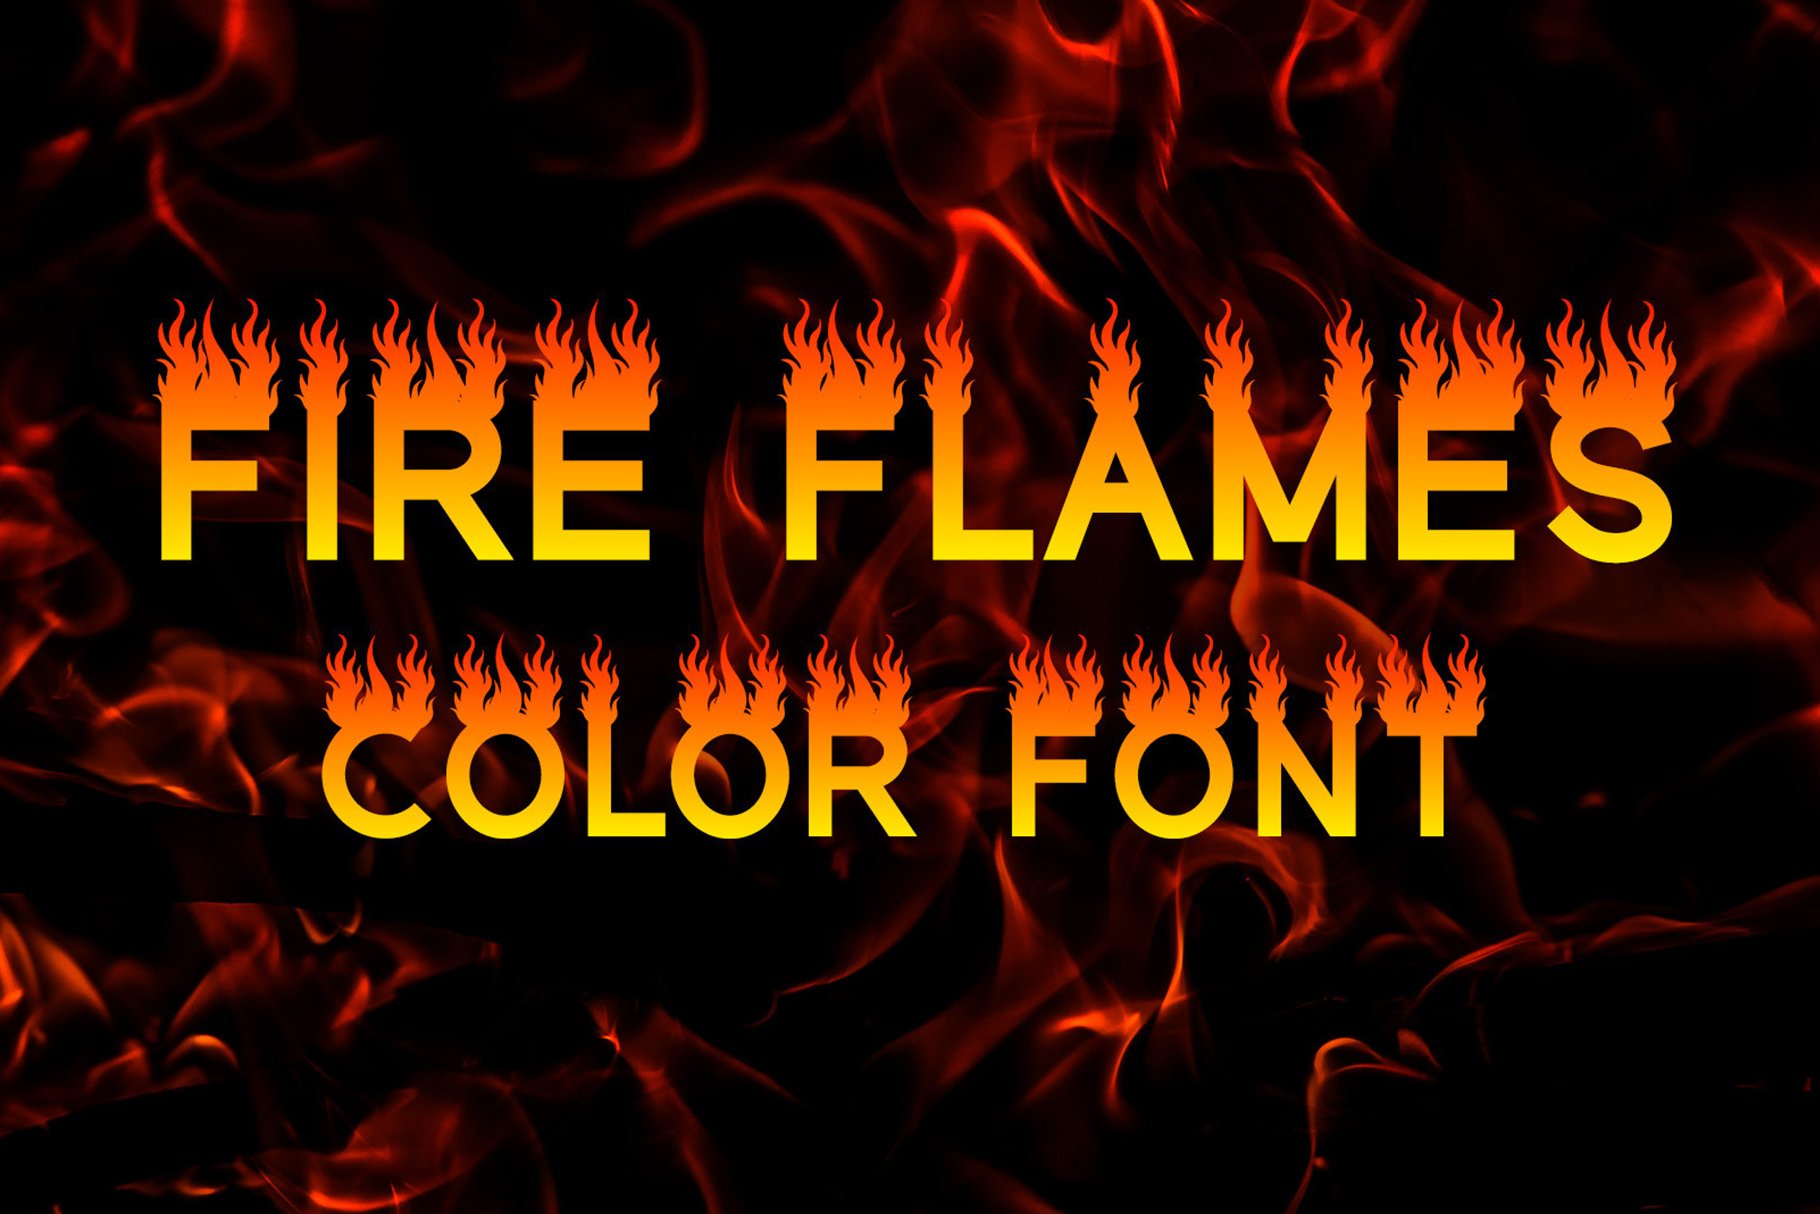 Fire Flames Font cover image.